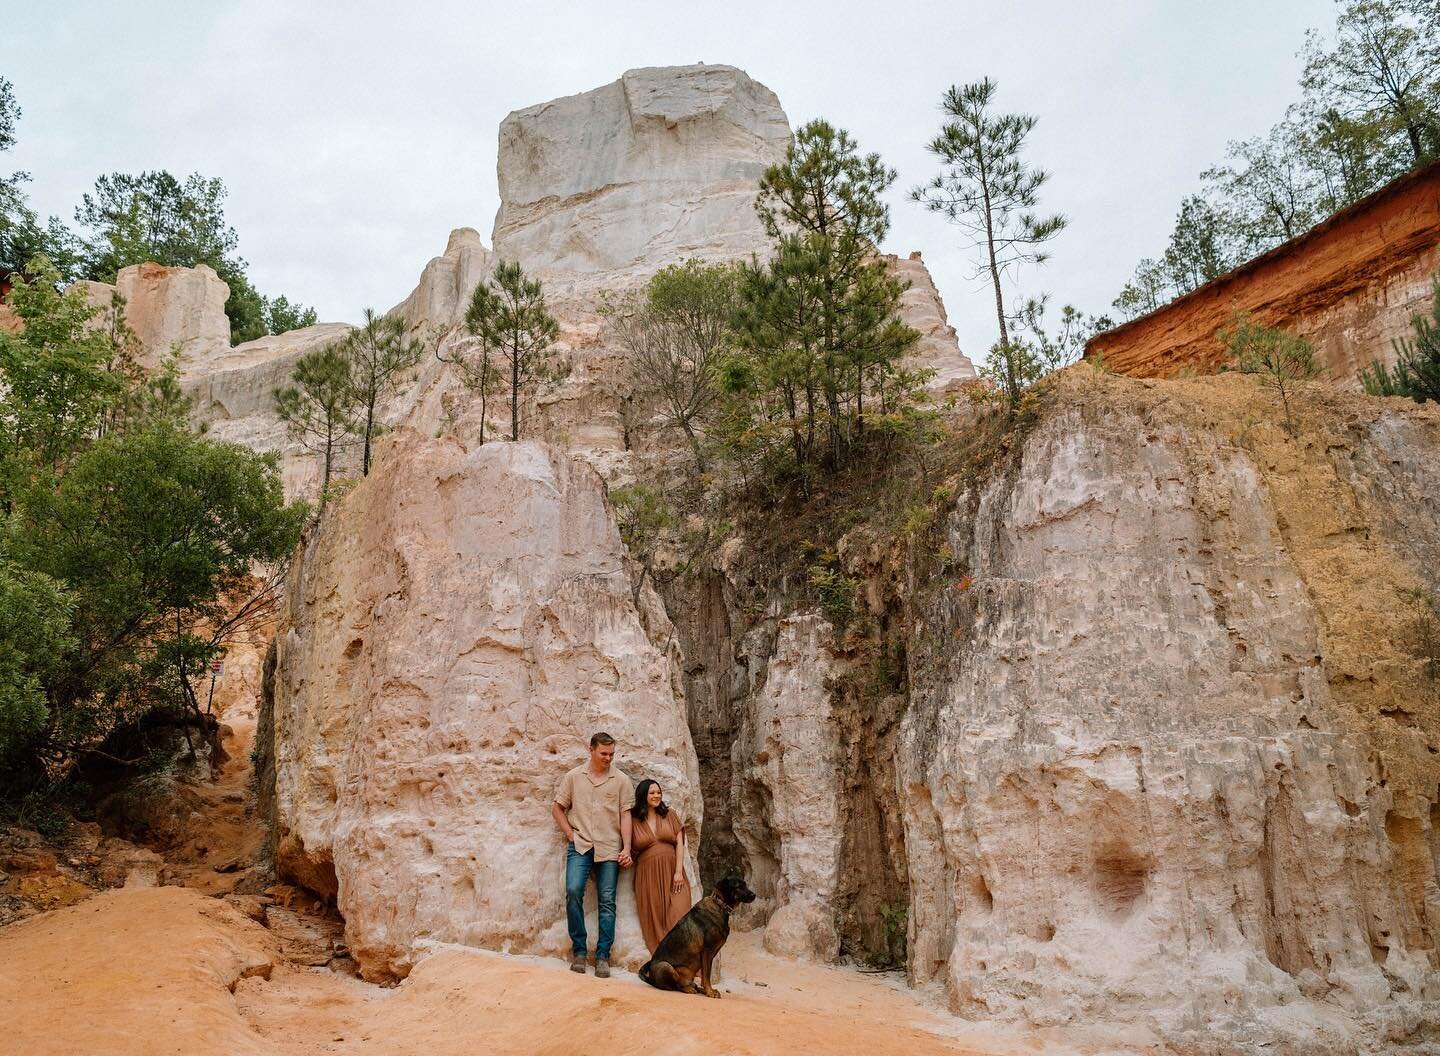 Part 1 of Elissa + Chaz&rsquo;s Providence Canyon maternity session 🤯🙌🏼

Elissa and I are friends from college and were roommates for a year in New York City! Her and Chaz are currently stationed at Fort Benning, so Providence Canyon was the perfe